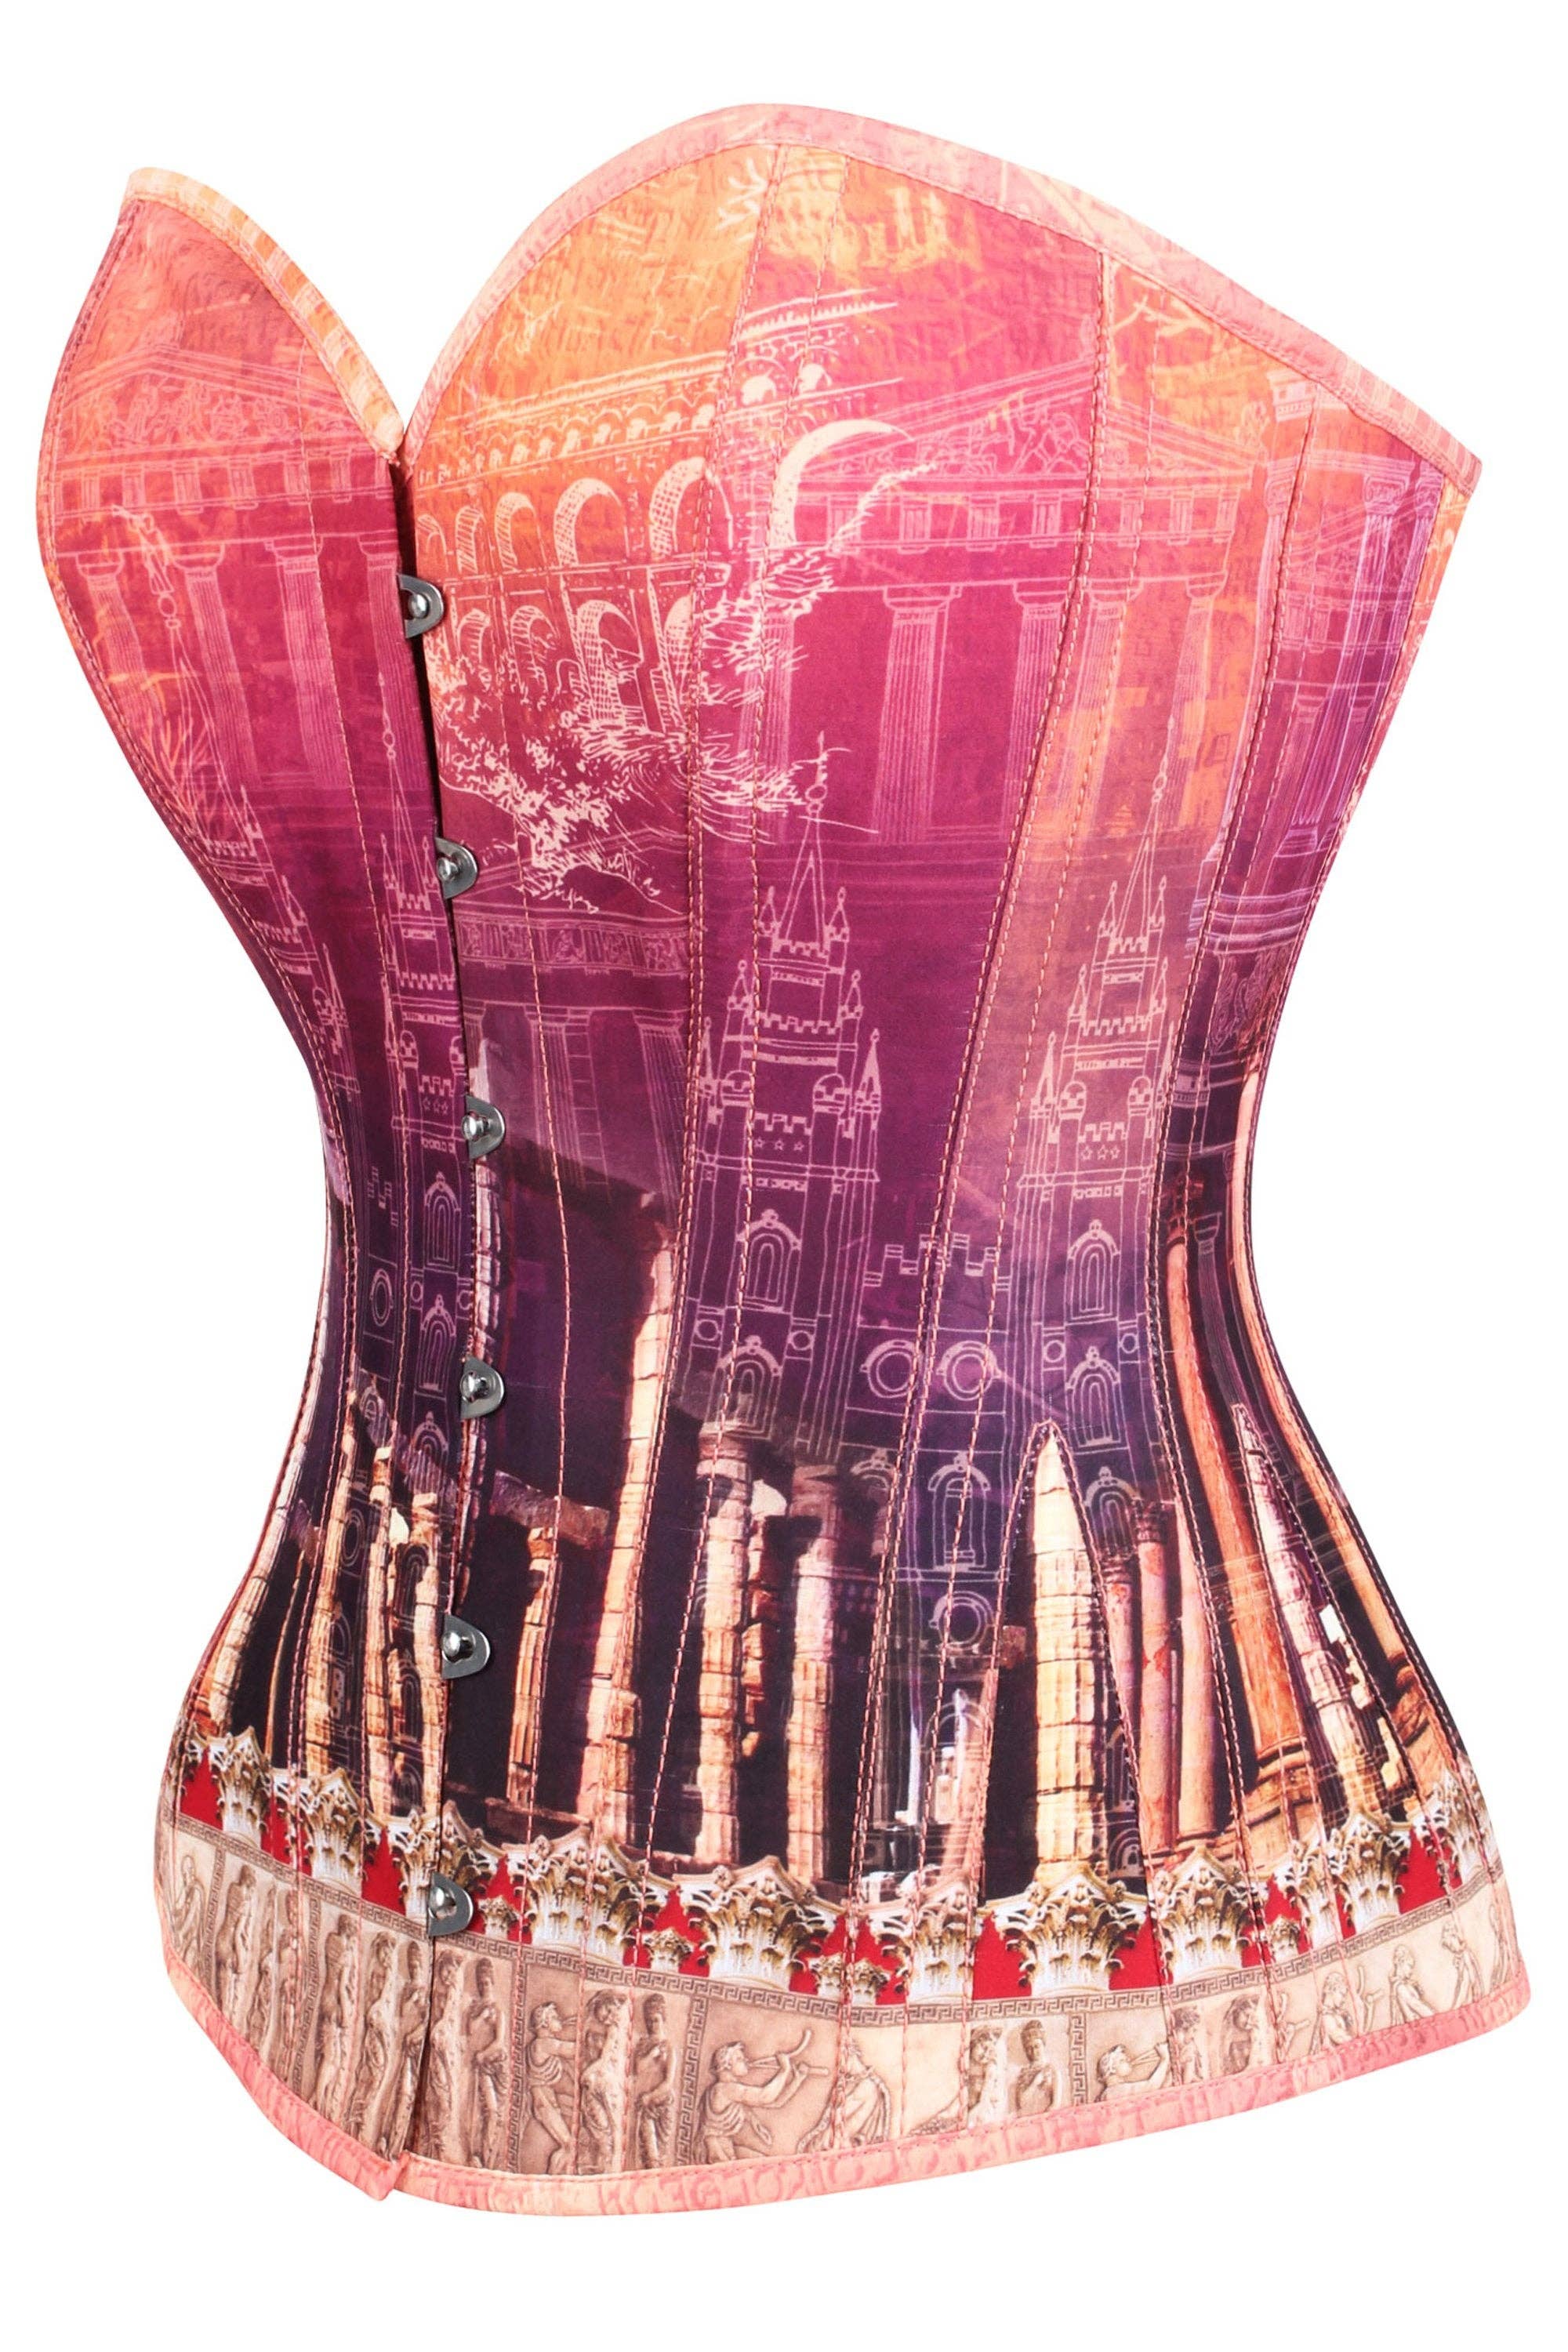 Corset Story - ARCHITECTURAL PRINT WAIST TAMING CORSET: 36" Corset (Suitable for 39-40" Natural Waist)